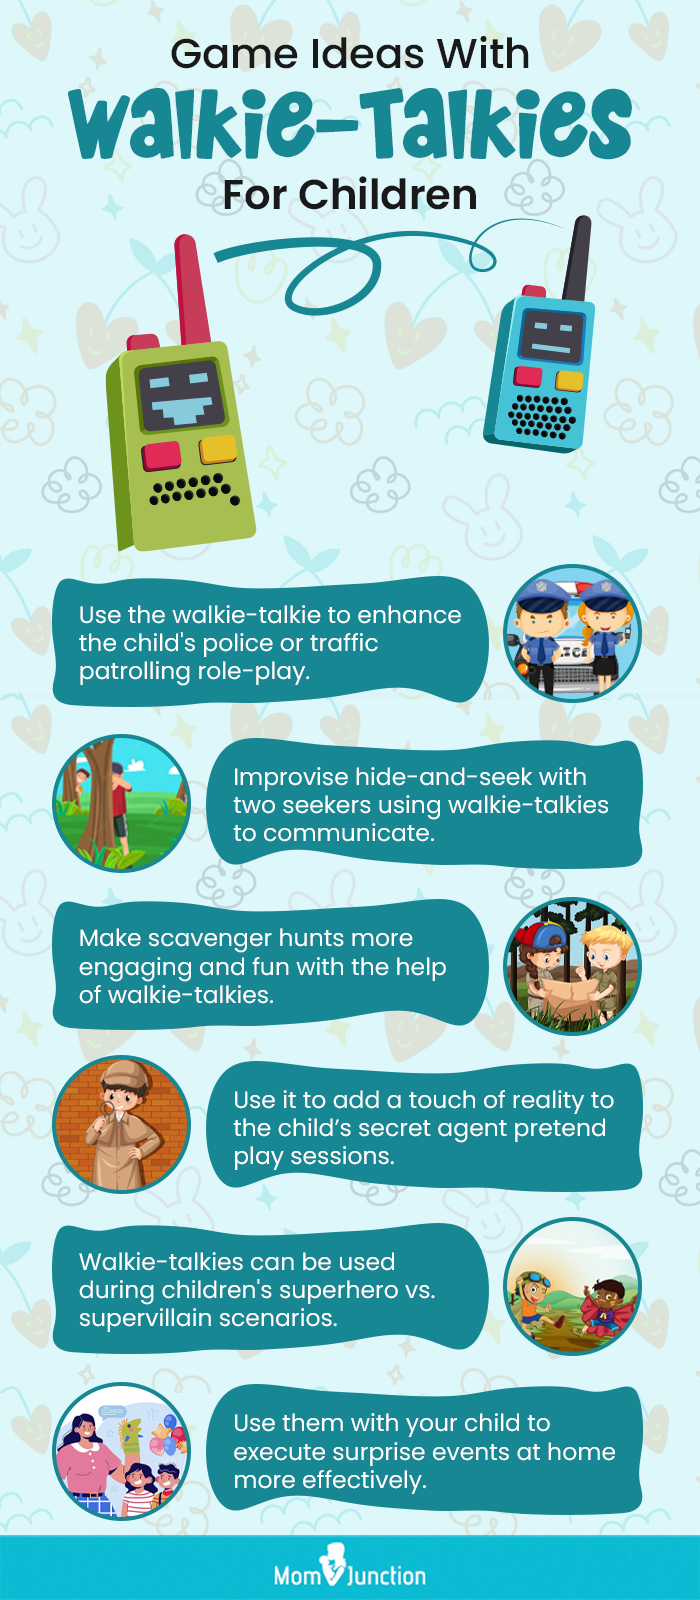 Game Ideas With Walkie-Talkies For Children (infographic)